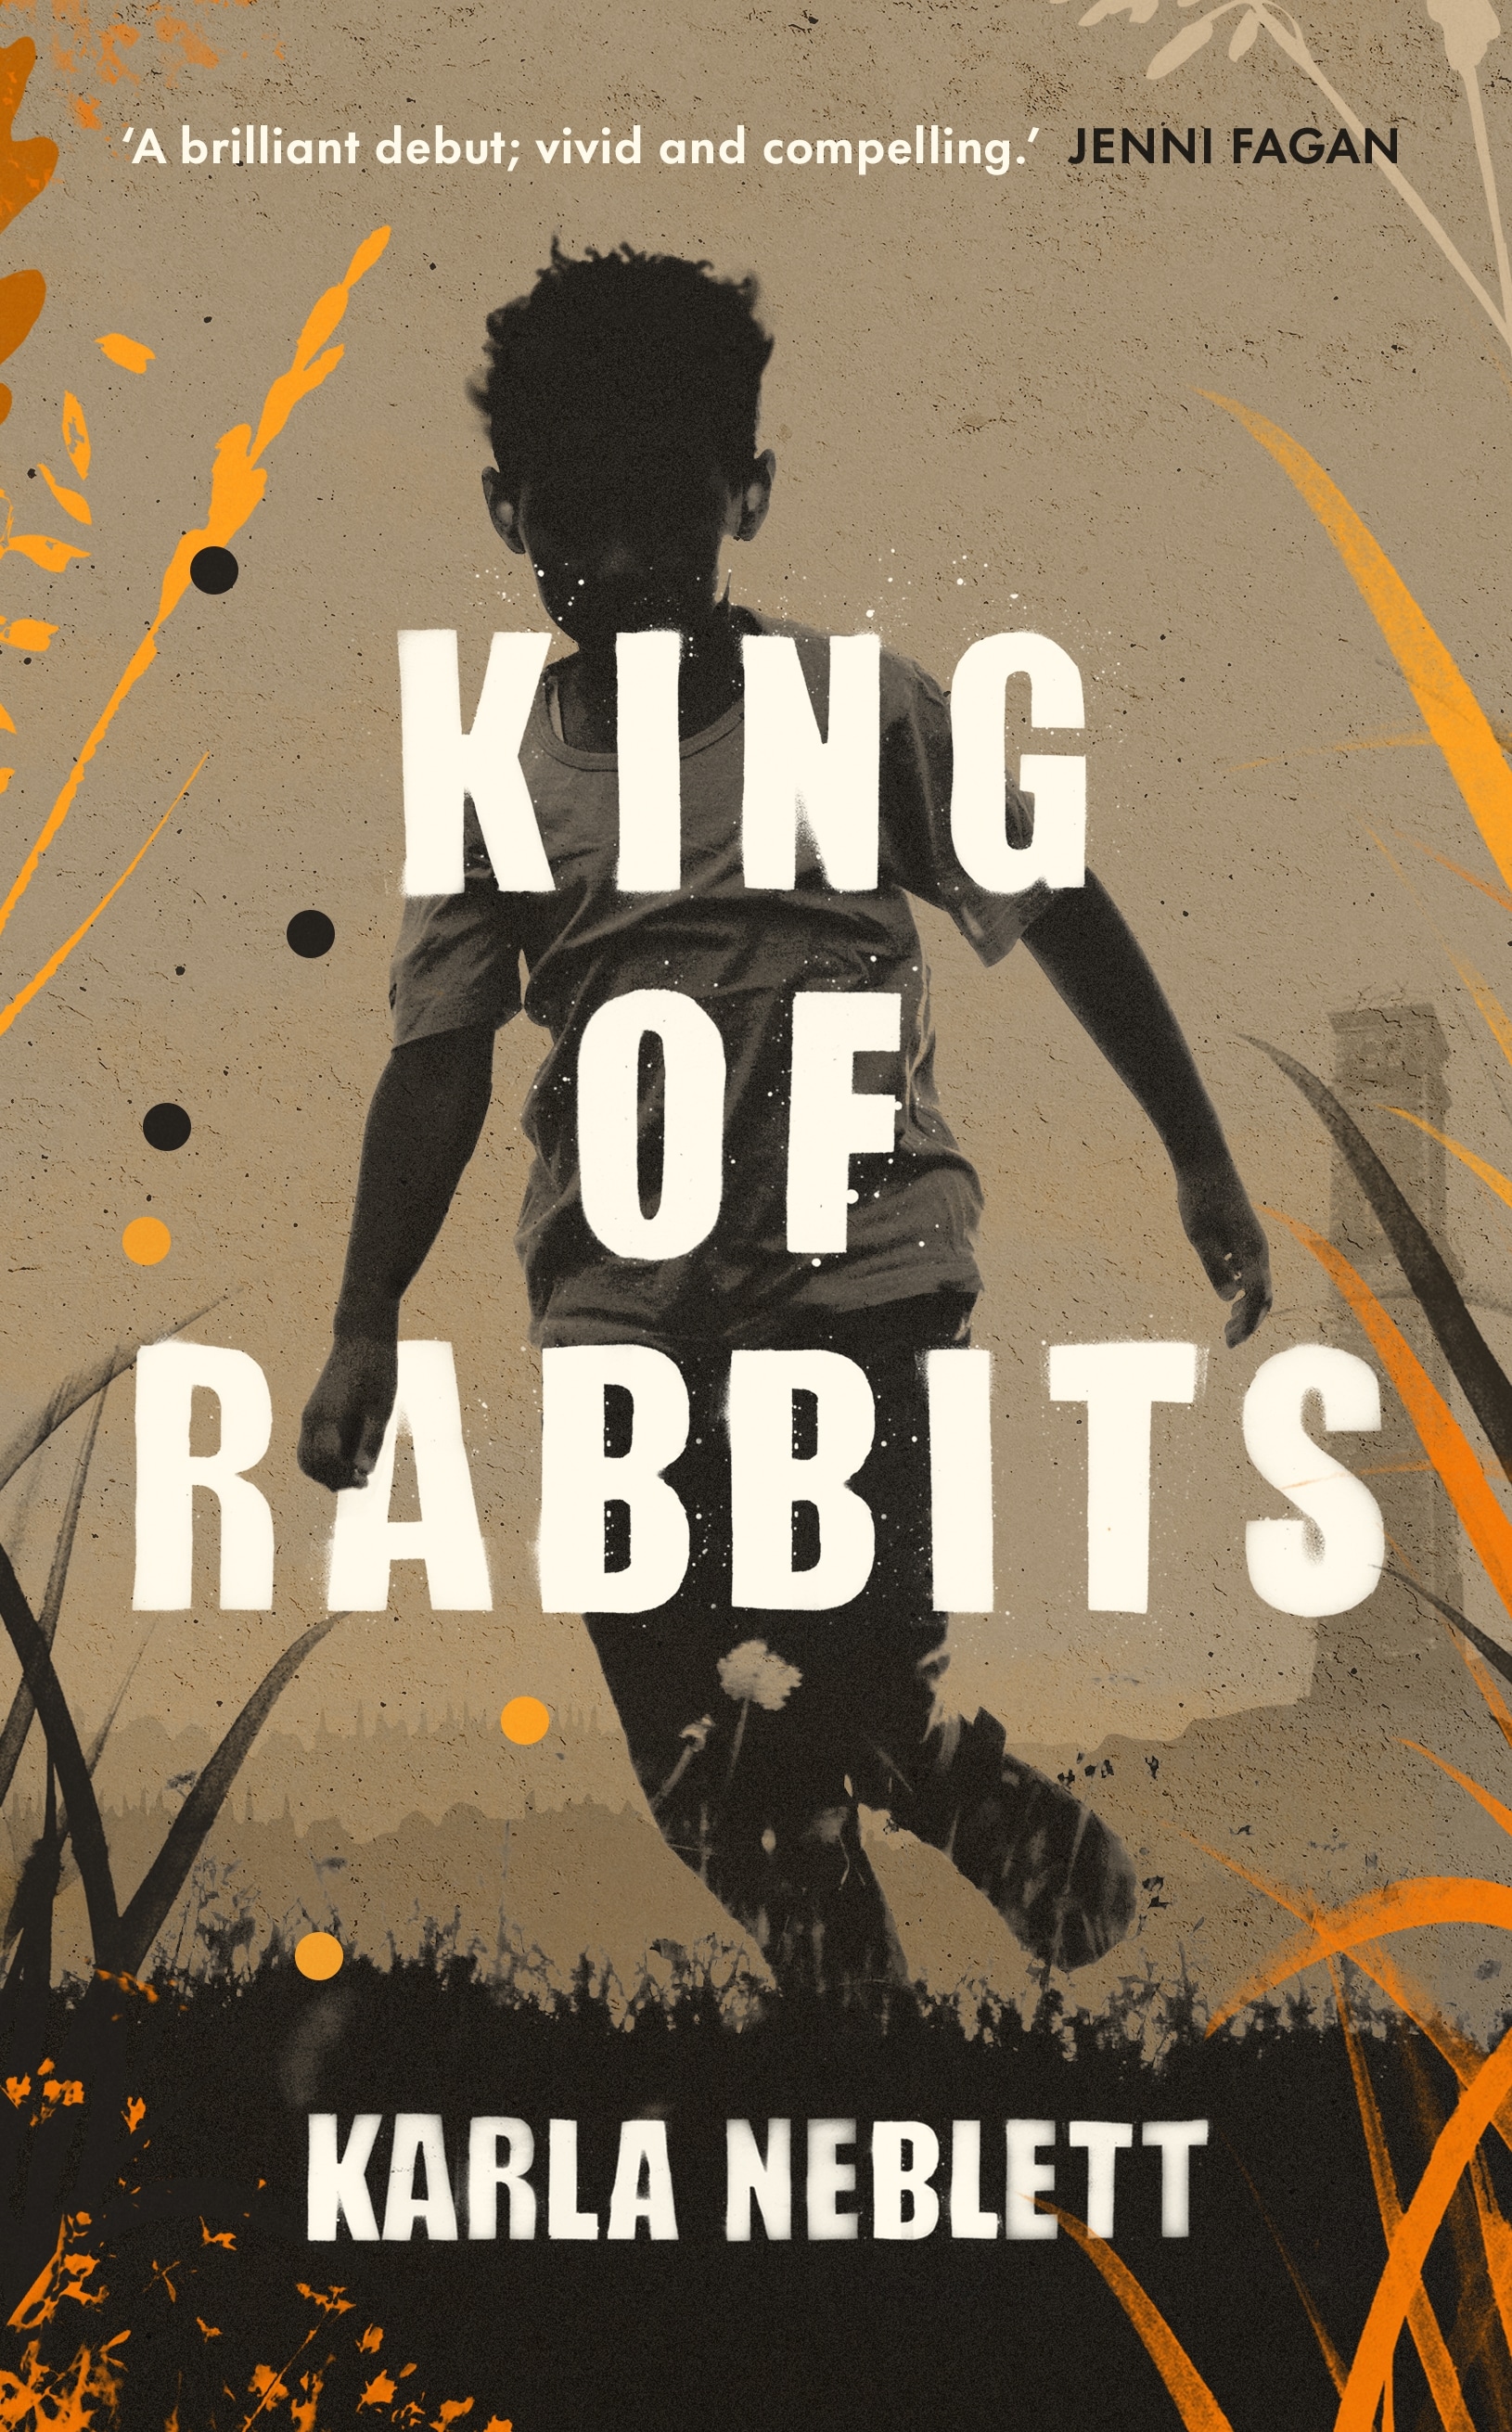 Book “King of Rabbits” by Karla Neblett — March 25, 2021